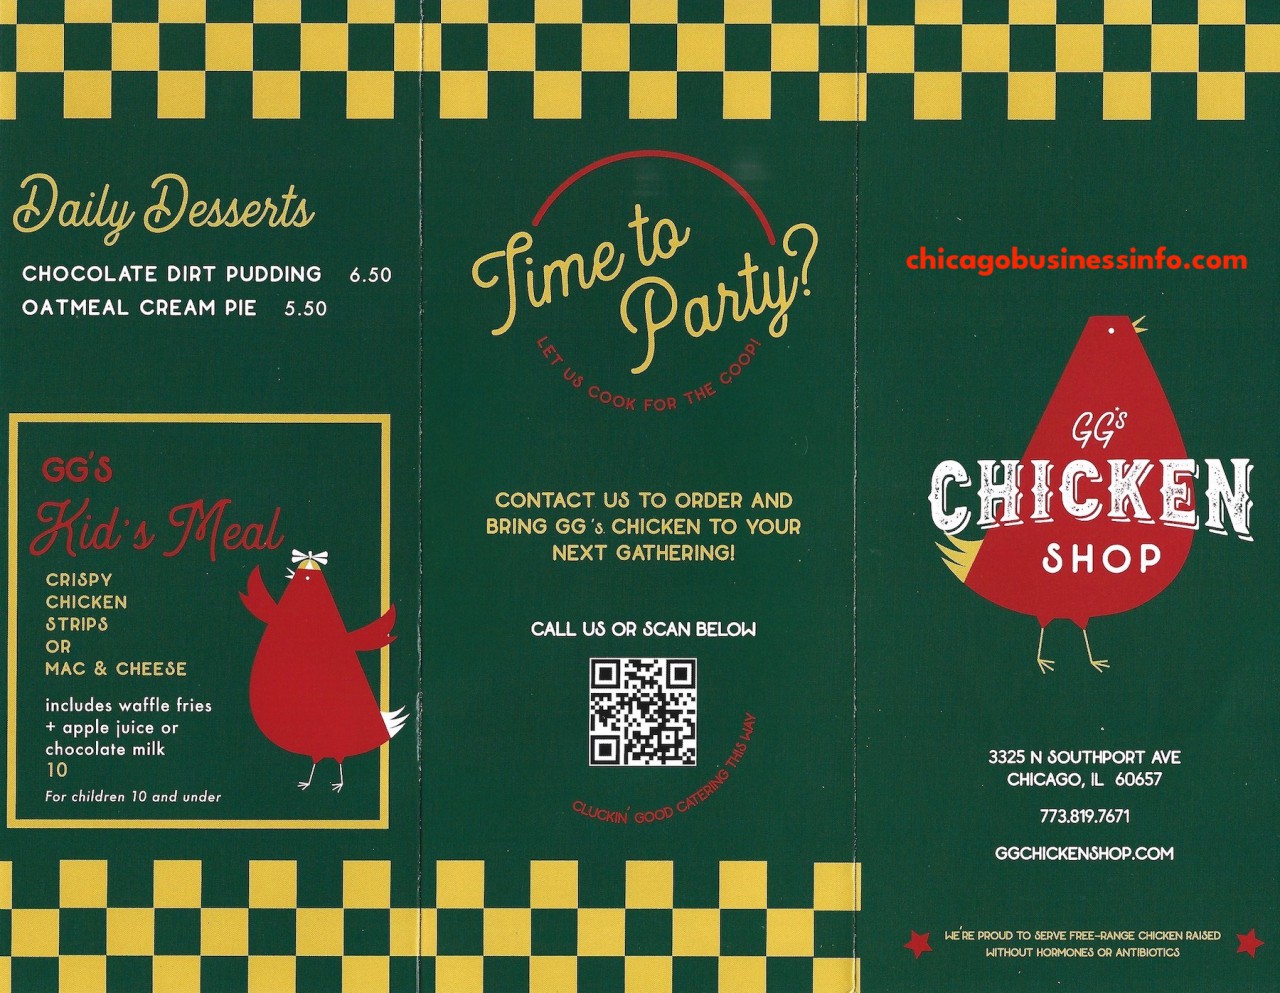 GGs Chicken Shop Chicago Carry Out Menu 1